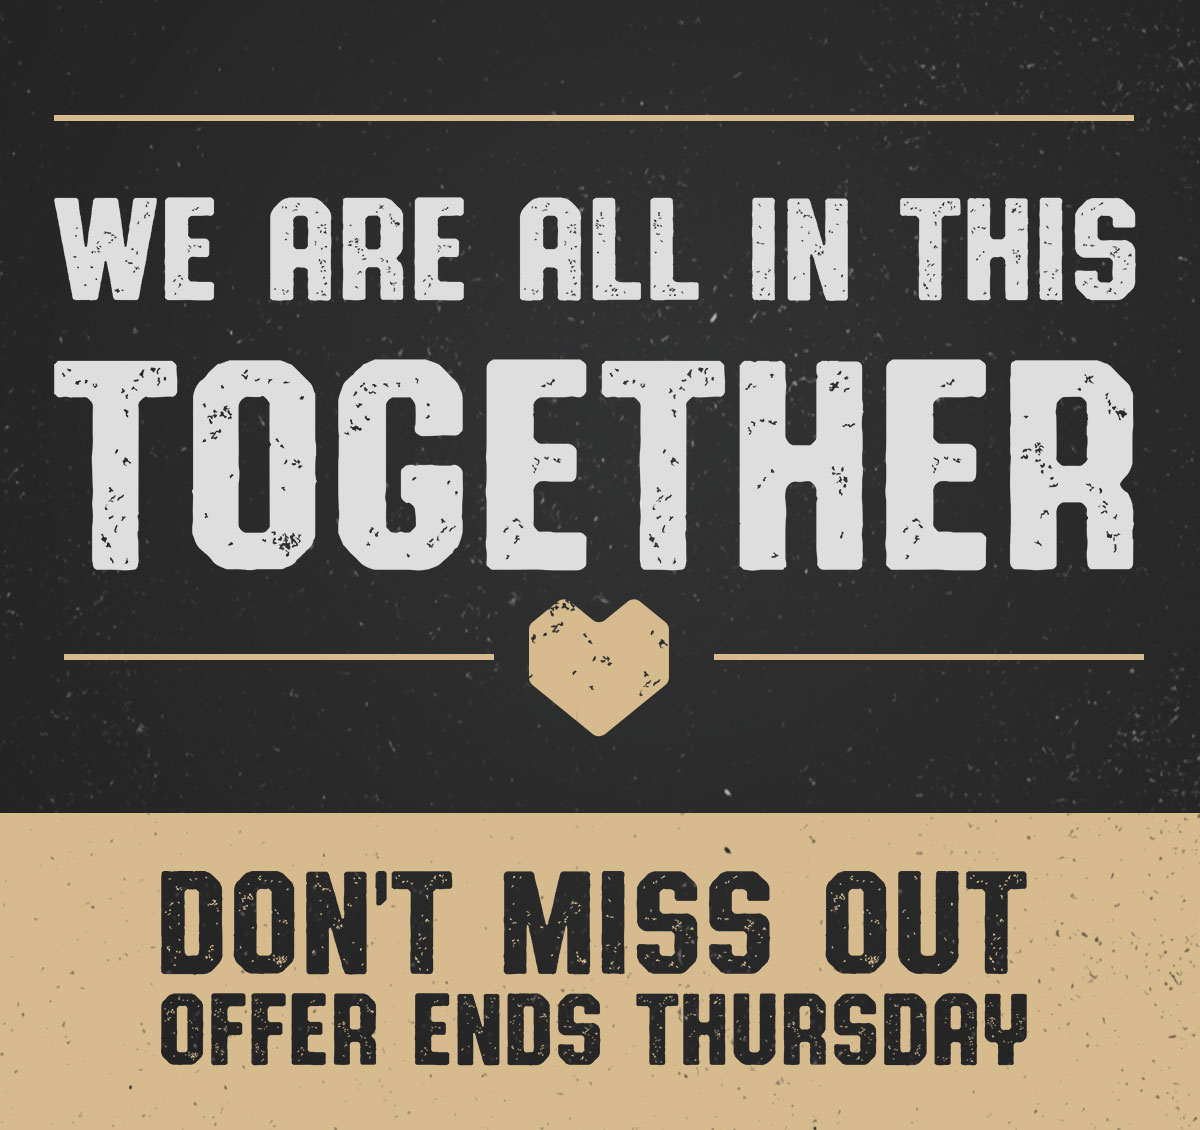 We are all in this together (heart). Don''t Miss Out. Offer ends Thursday.